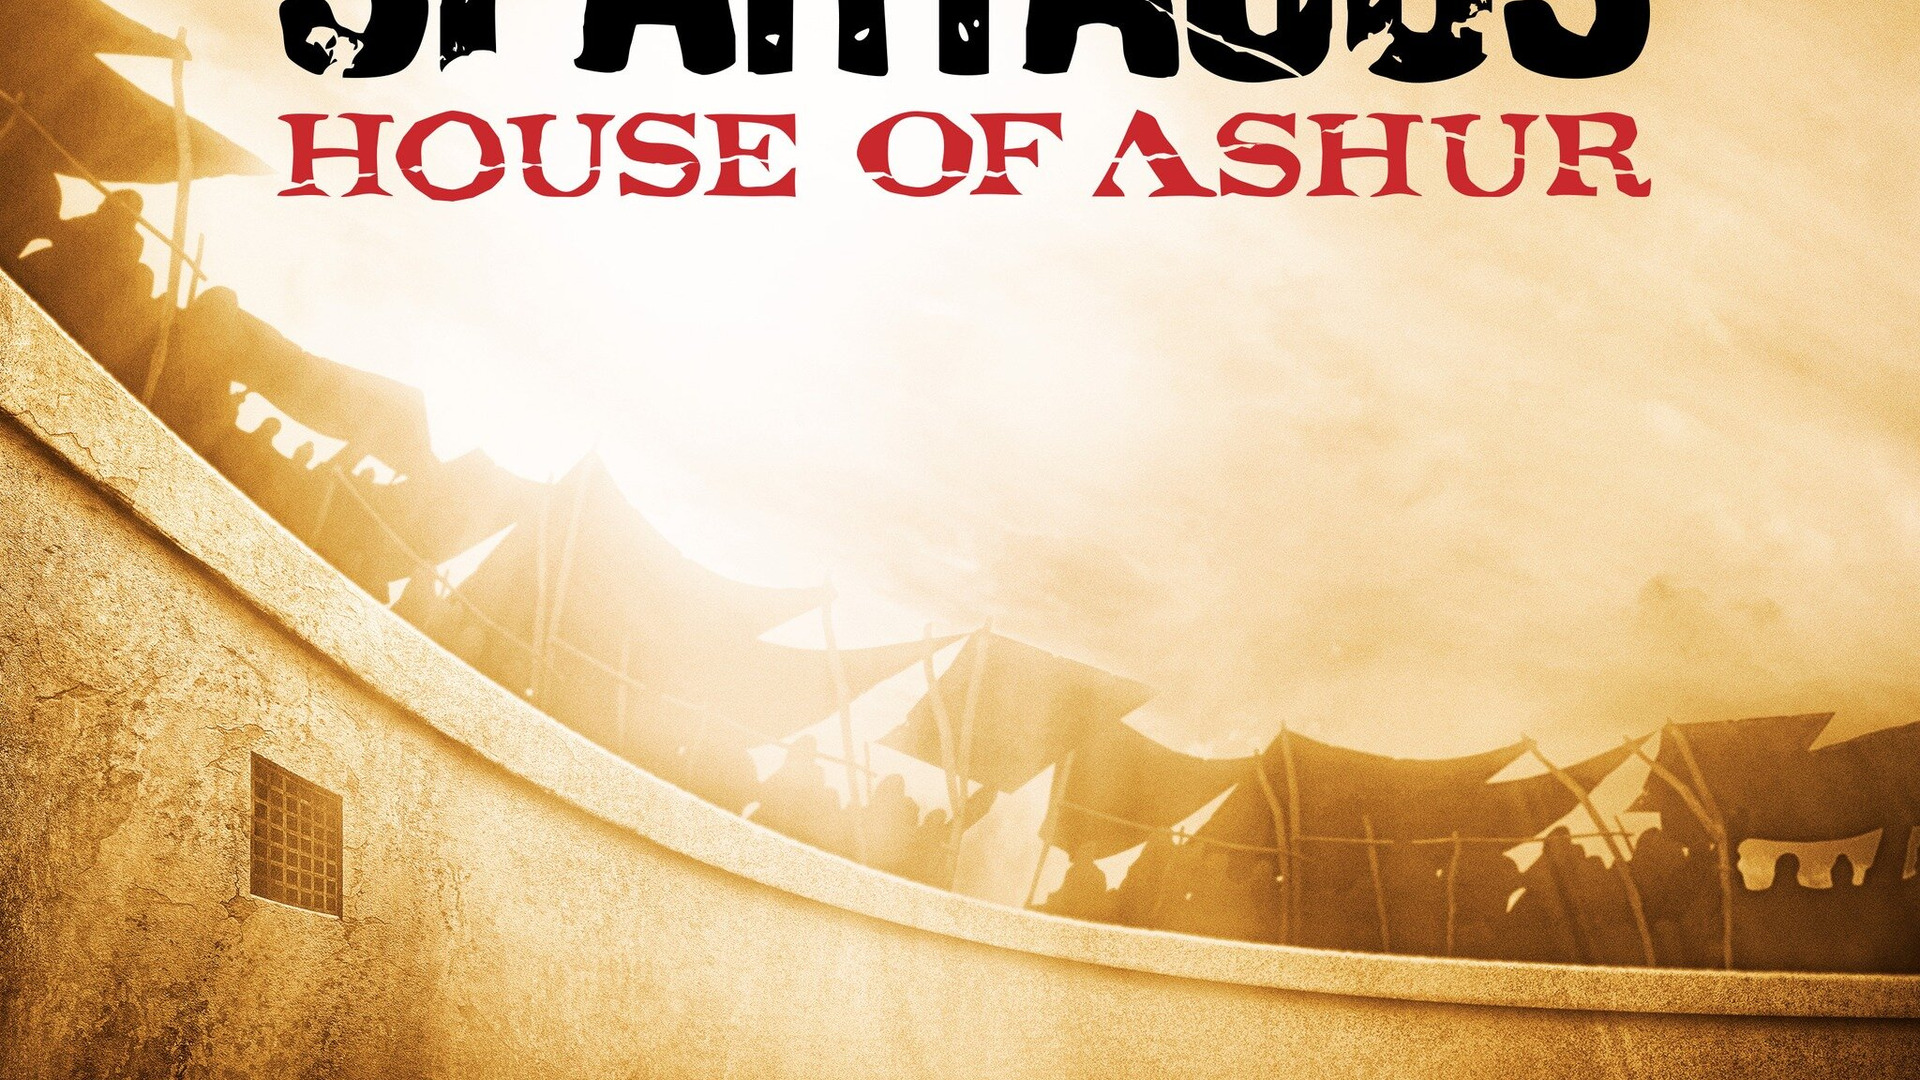 Show Spartacus: House of Ashur